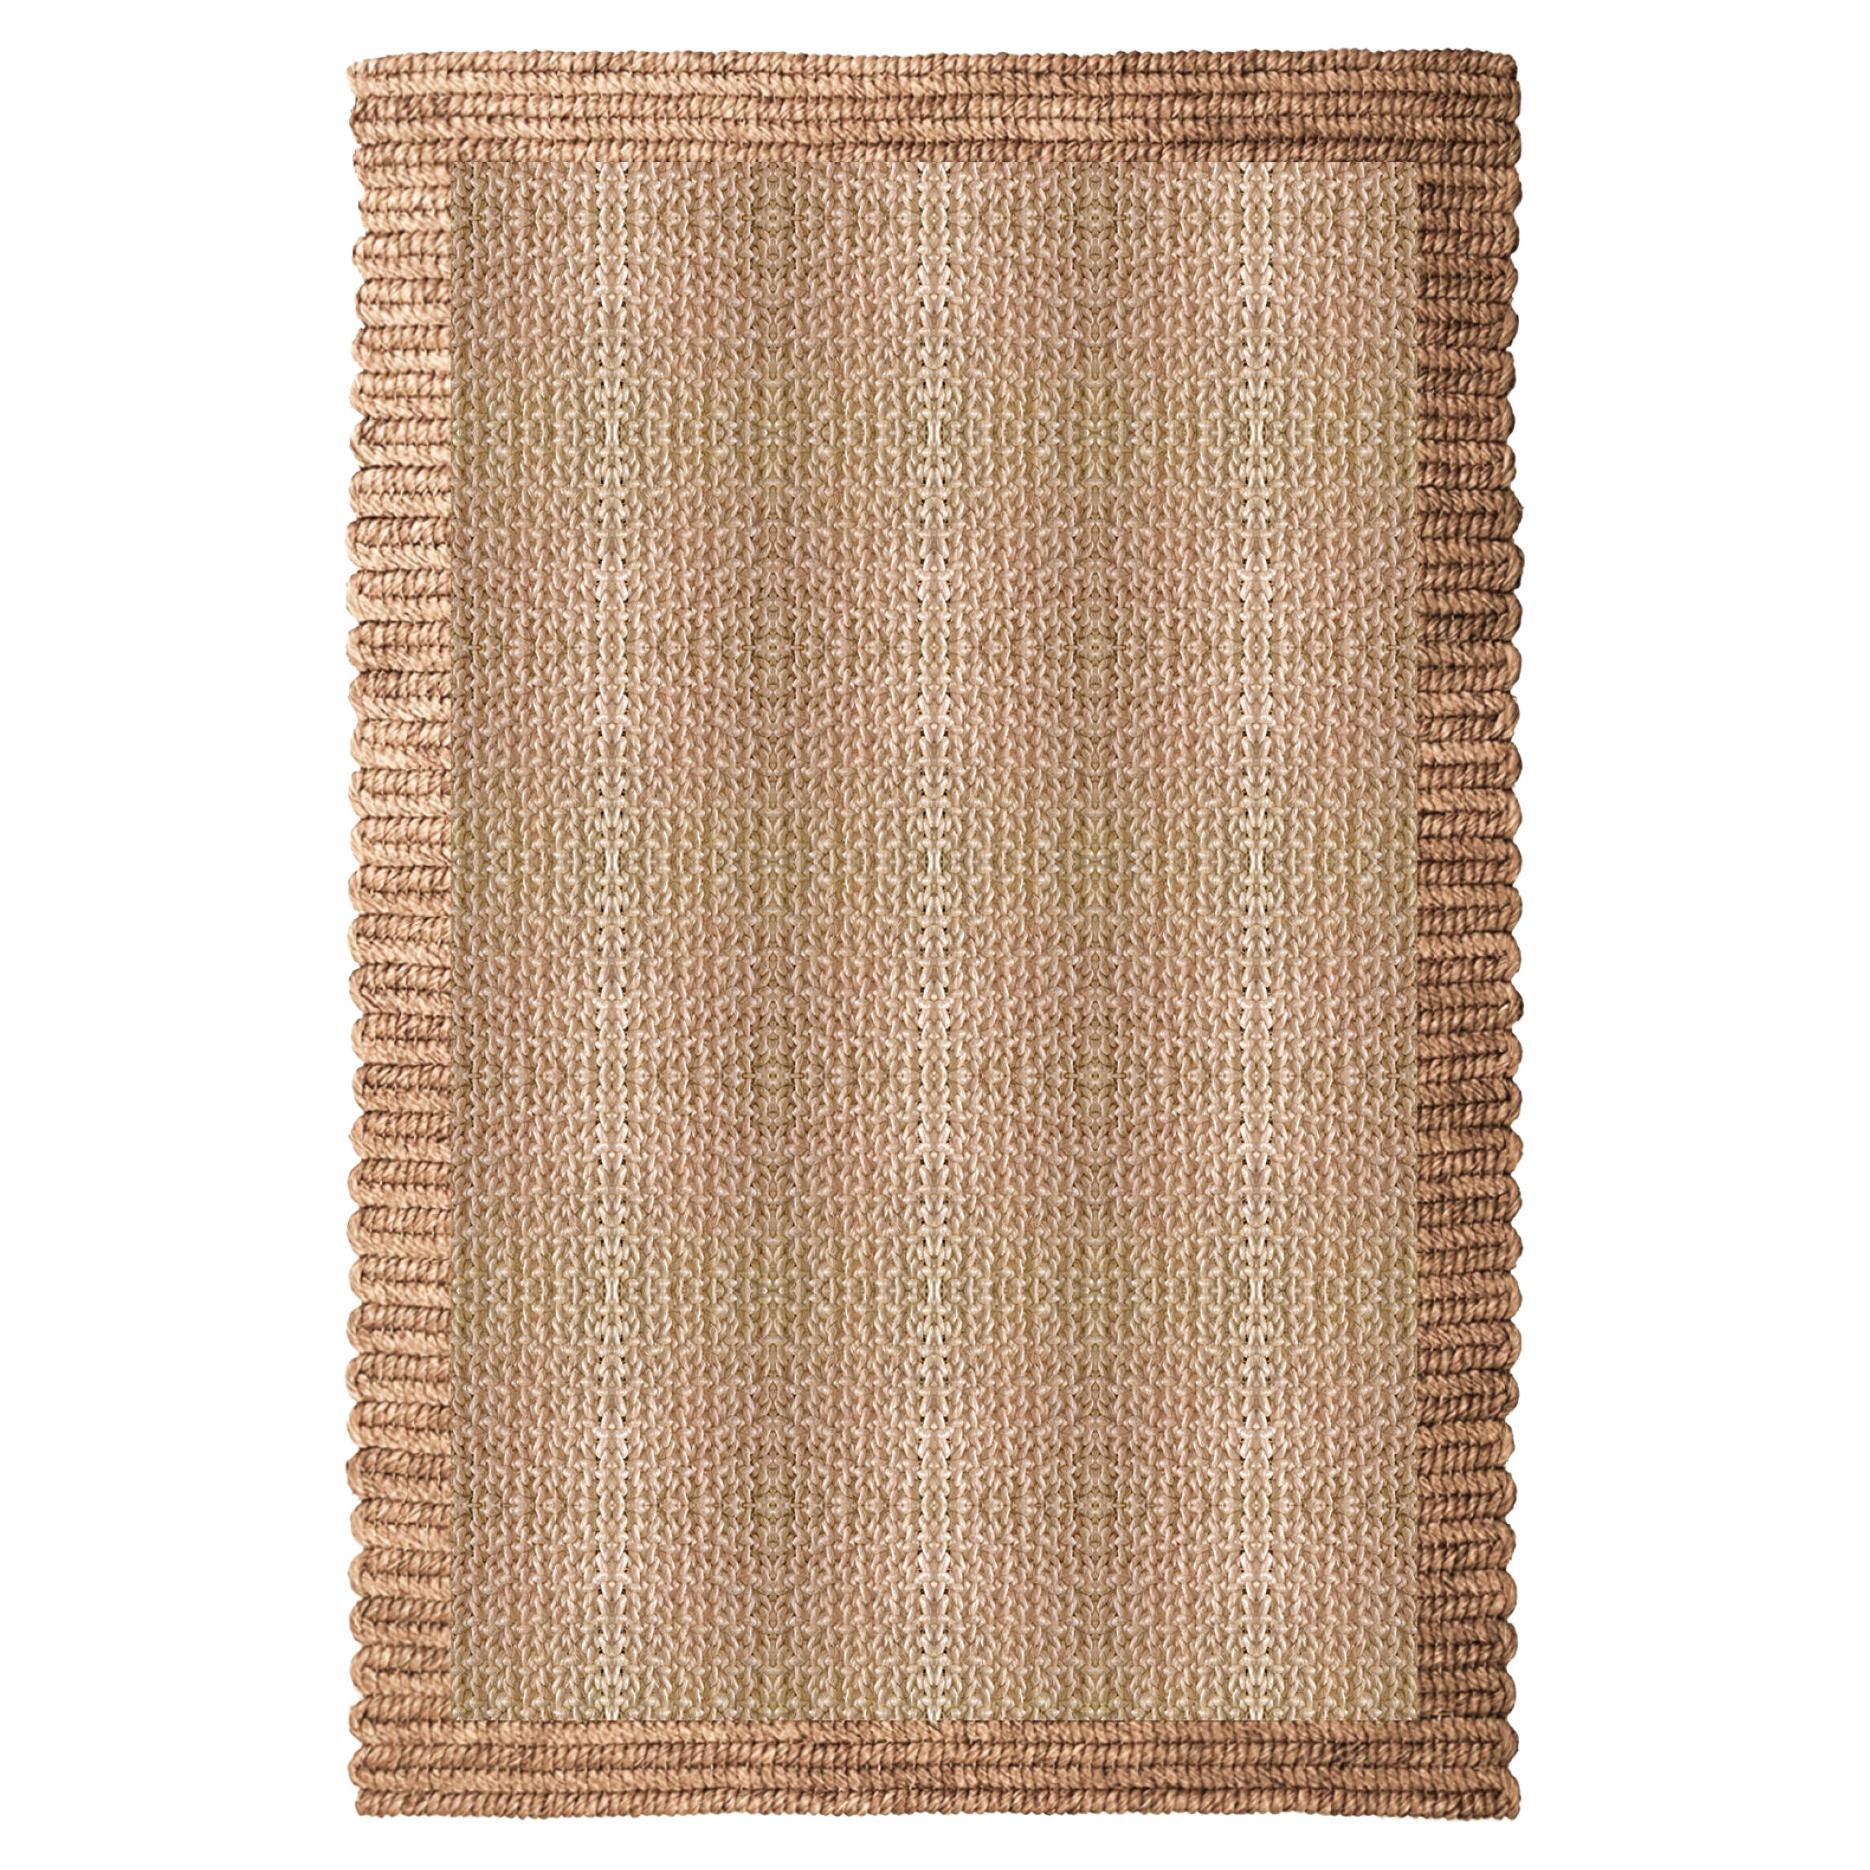 'NAP Uni' Rug in Abaca by Claire Vos for Musett Design For Sale